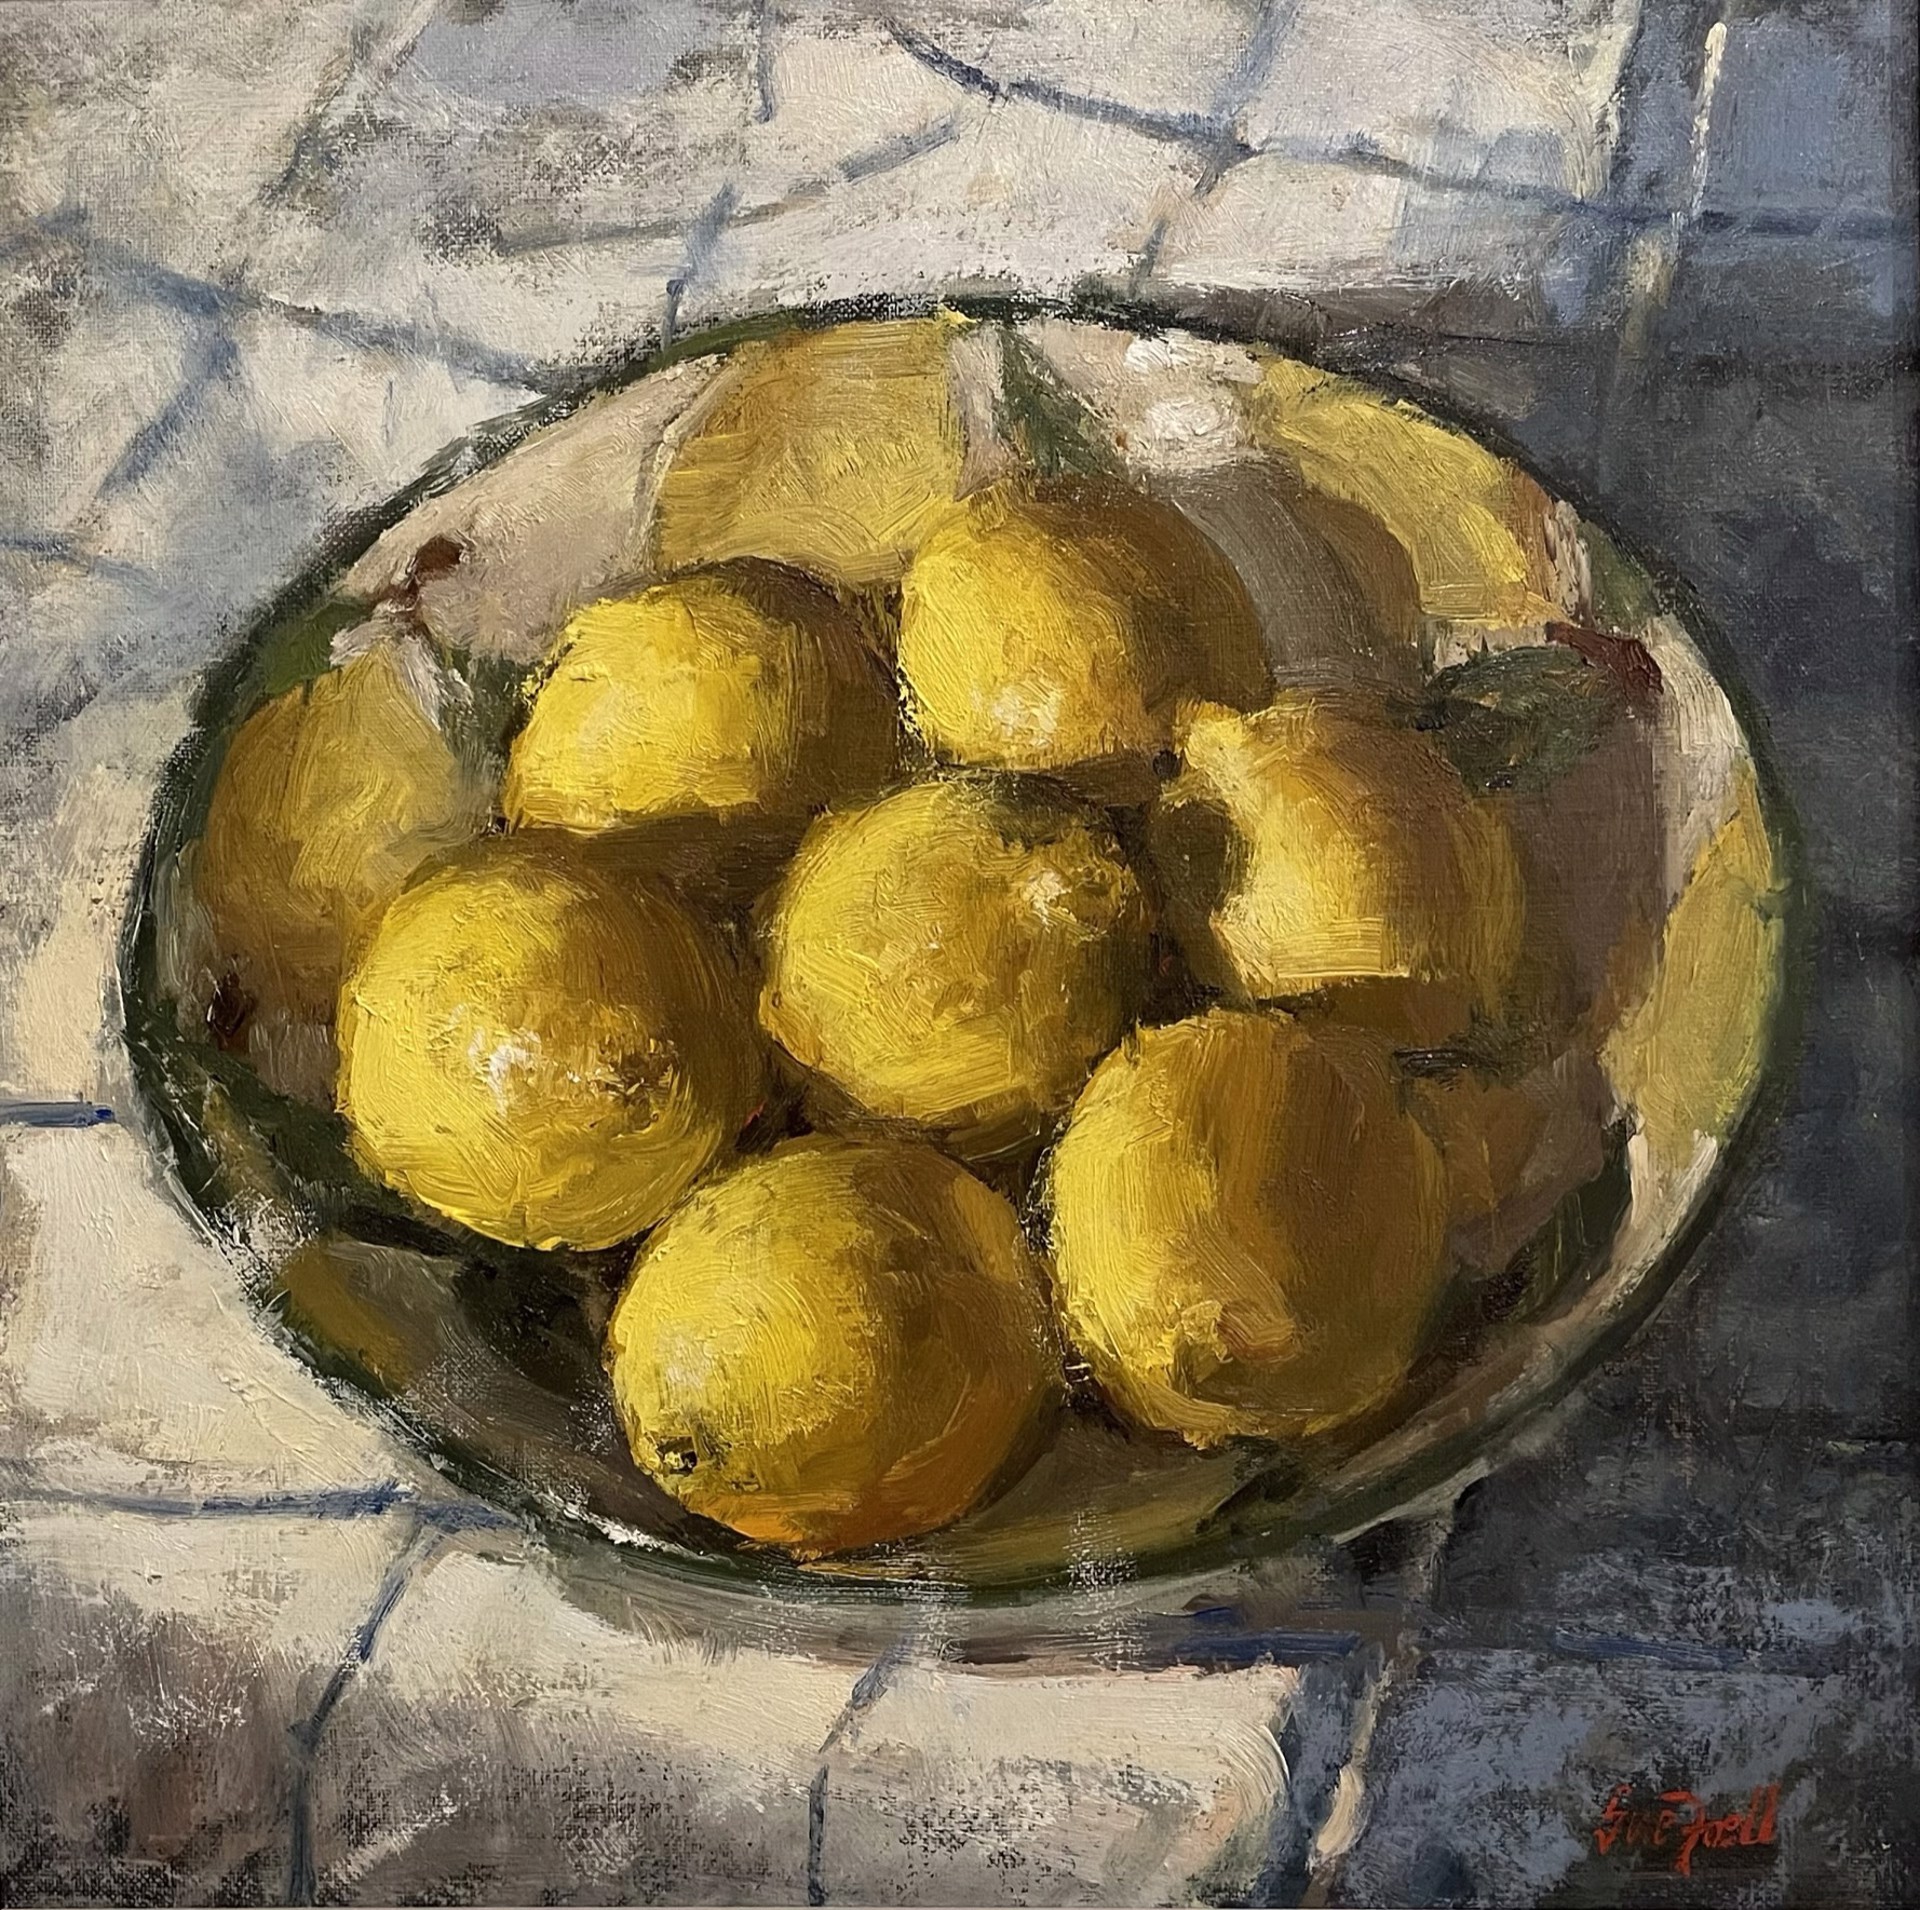 Pear with old crock by Sue Foell